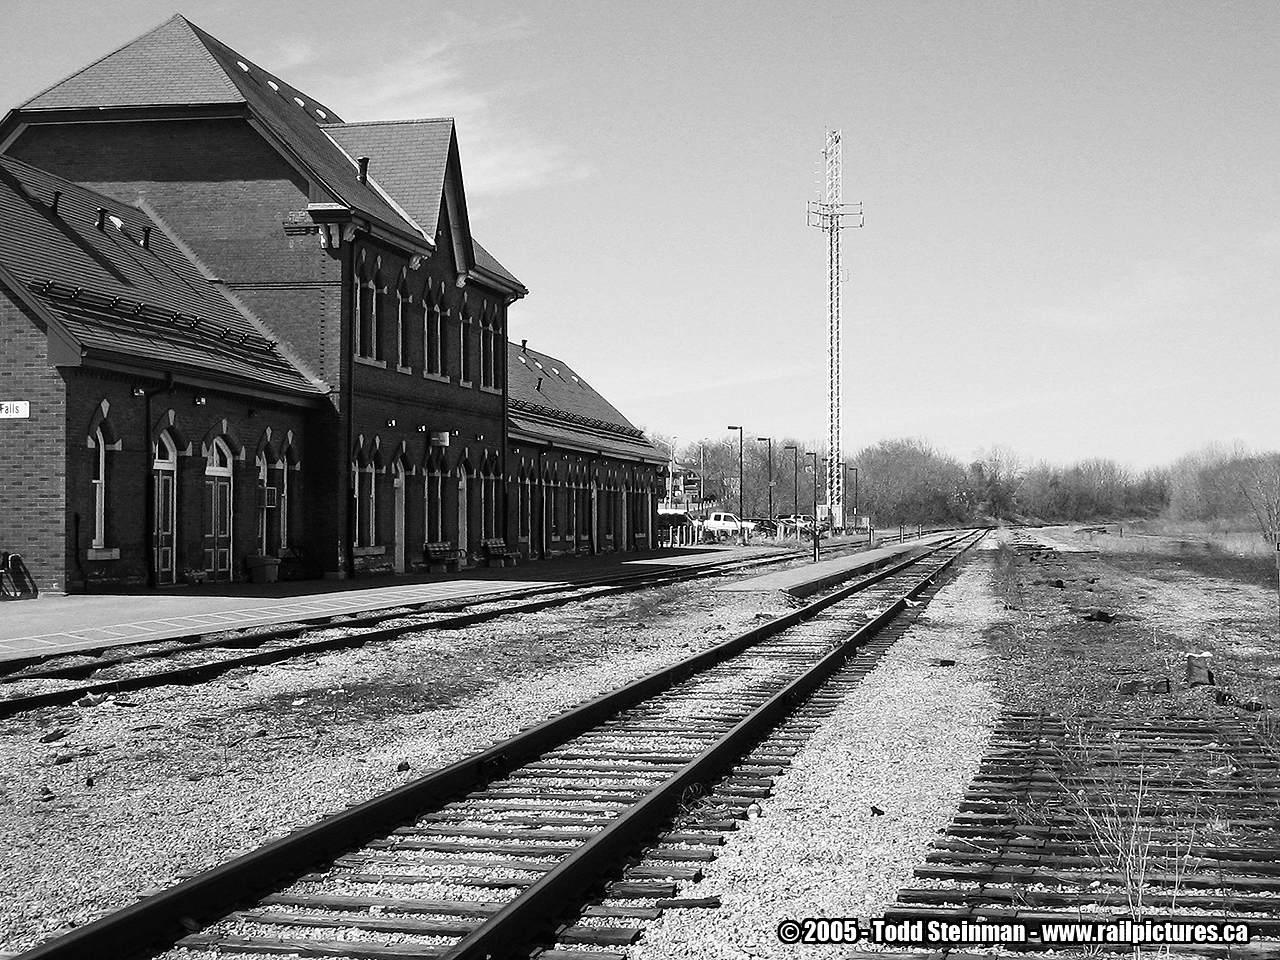 From Daniel Odette's recent post of his photo of the Stanley Street crossing, he had mentioned how much has changed on the rail scene in Niagara Falls. 

My first trip to the station was a few years before this photo was taken. The massive rail yard (in front of the station) was long gone along with all other structures related to the steam and early diesel era. However, there were still 4 tracks intact.

Here, in 2005 - I came to the station on my second trip and found two sidings were gone. Little did I know too that the Victoria Street yard had also vanished. The area is a sad place to visit...almost forgotten...and even sadder upon my last trip to the grounds in 2009. Weeds have overtaken most of the area, although, somewhat good news is the fact that GO is now operating seasonally.